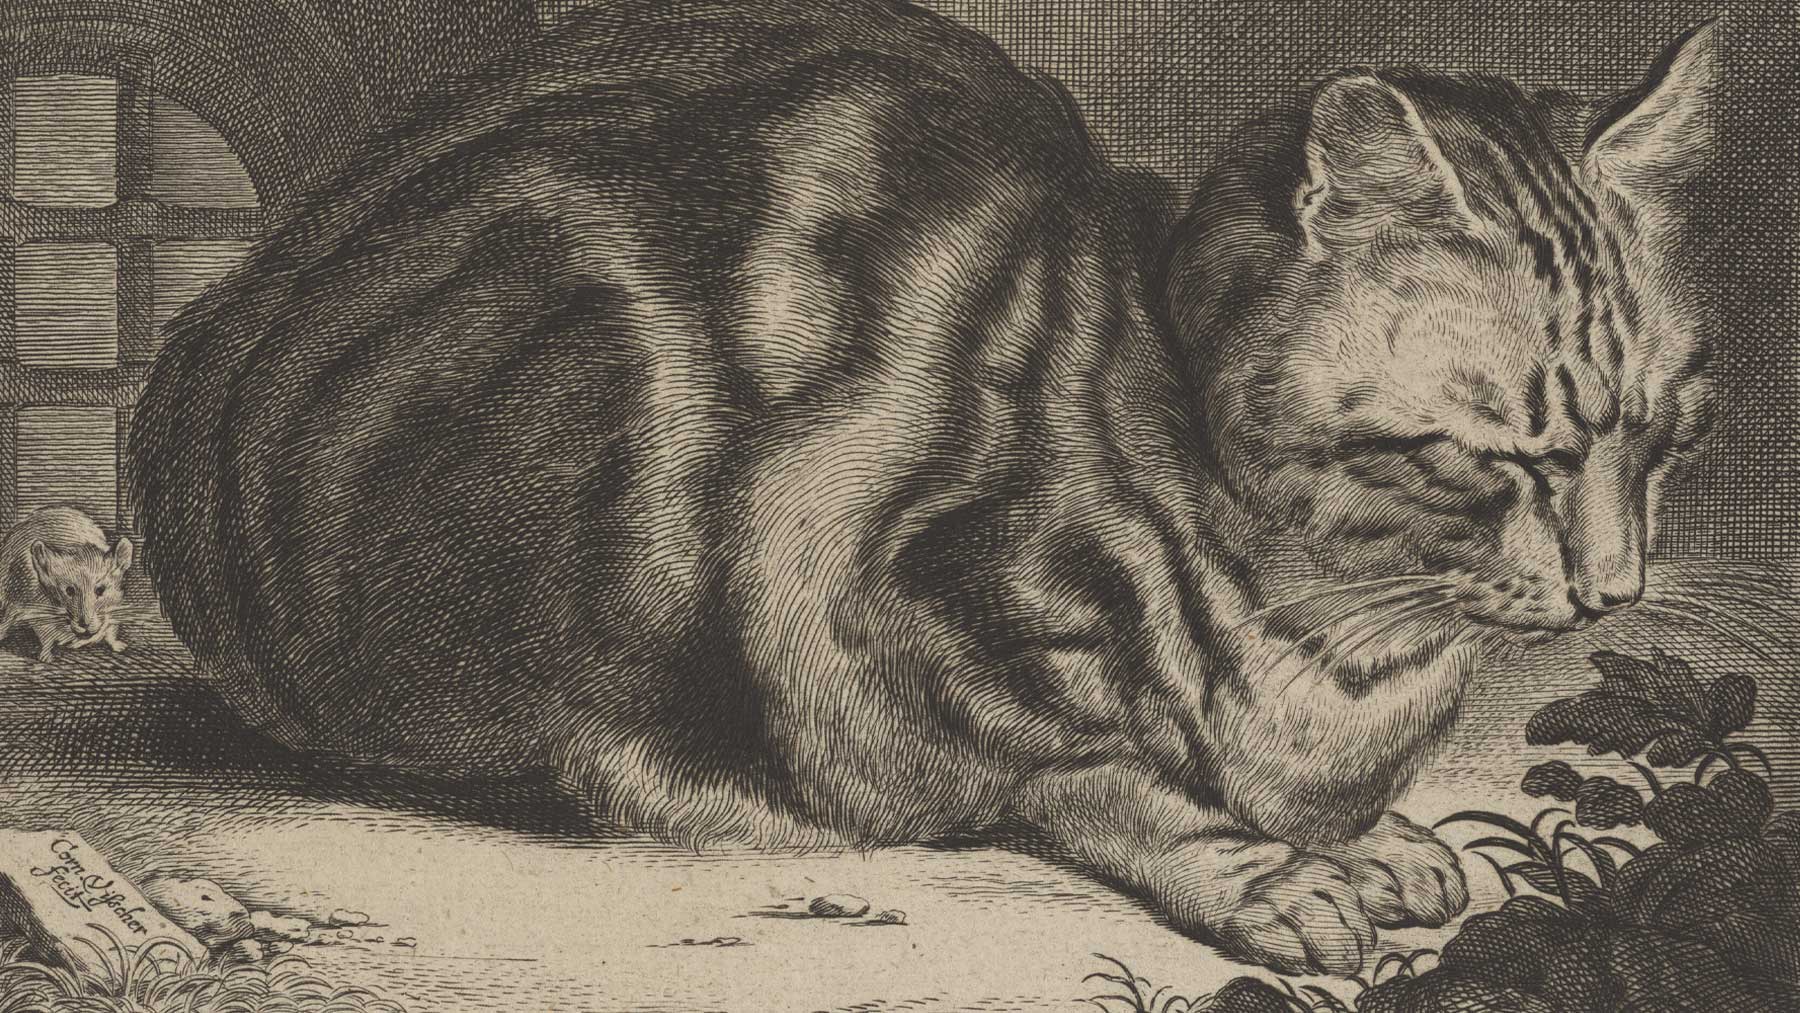 Image from Life Captured in Line: 17th-Century Dutch and Flemish Prints